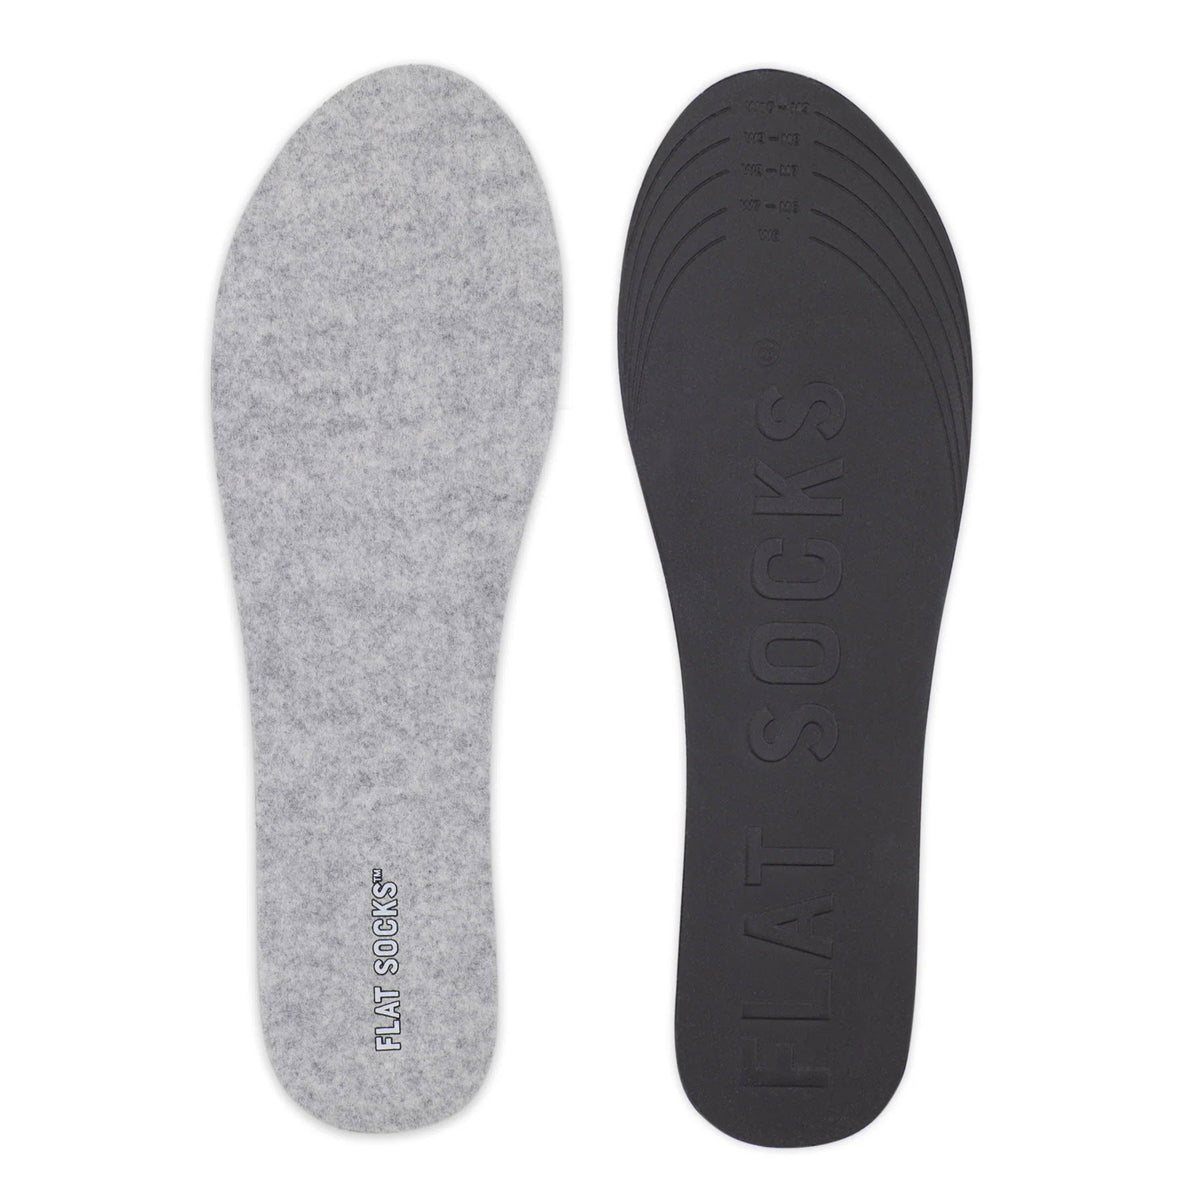 Two FLAT SOCKS LIGHT GREY MICRO WOOL - WOMENS insoles displayed side-by-side, one gray and the other black, both with the logo &quot;FLAT SOCKS&quot; visible.